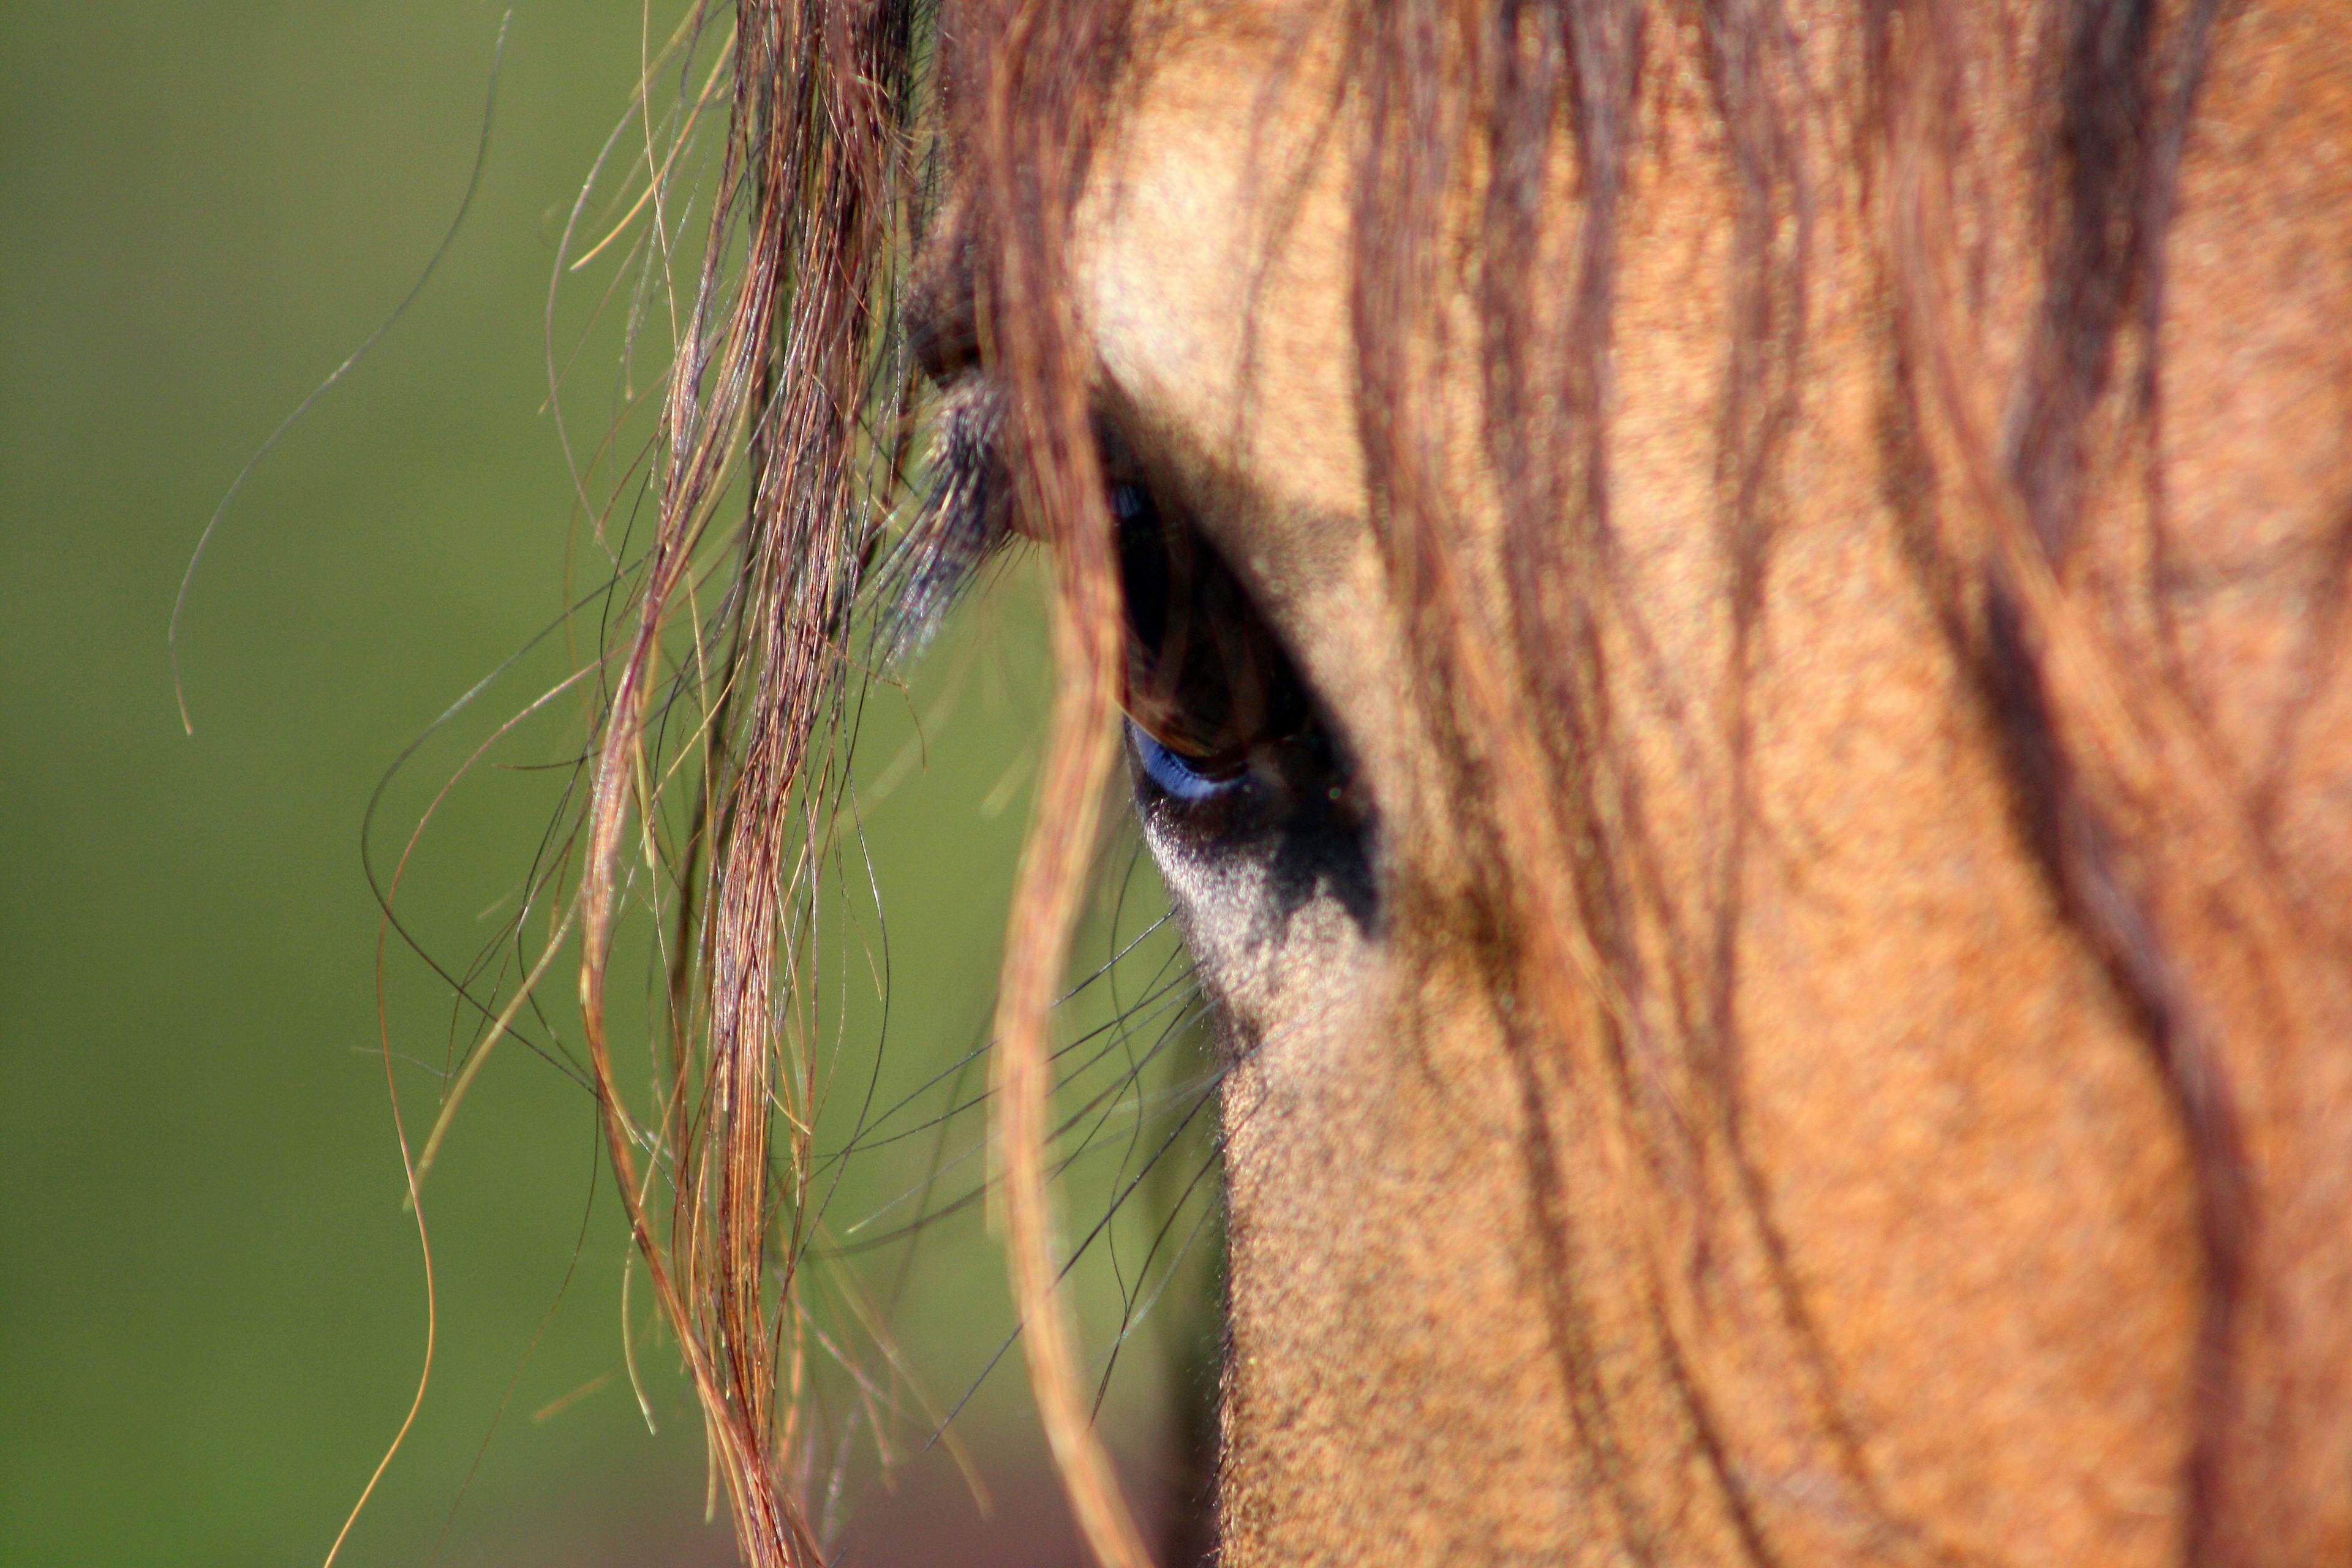 Equine West Nile virus: Its time to stop being complacent